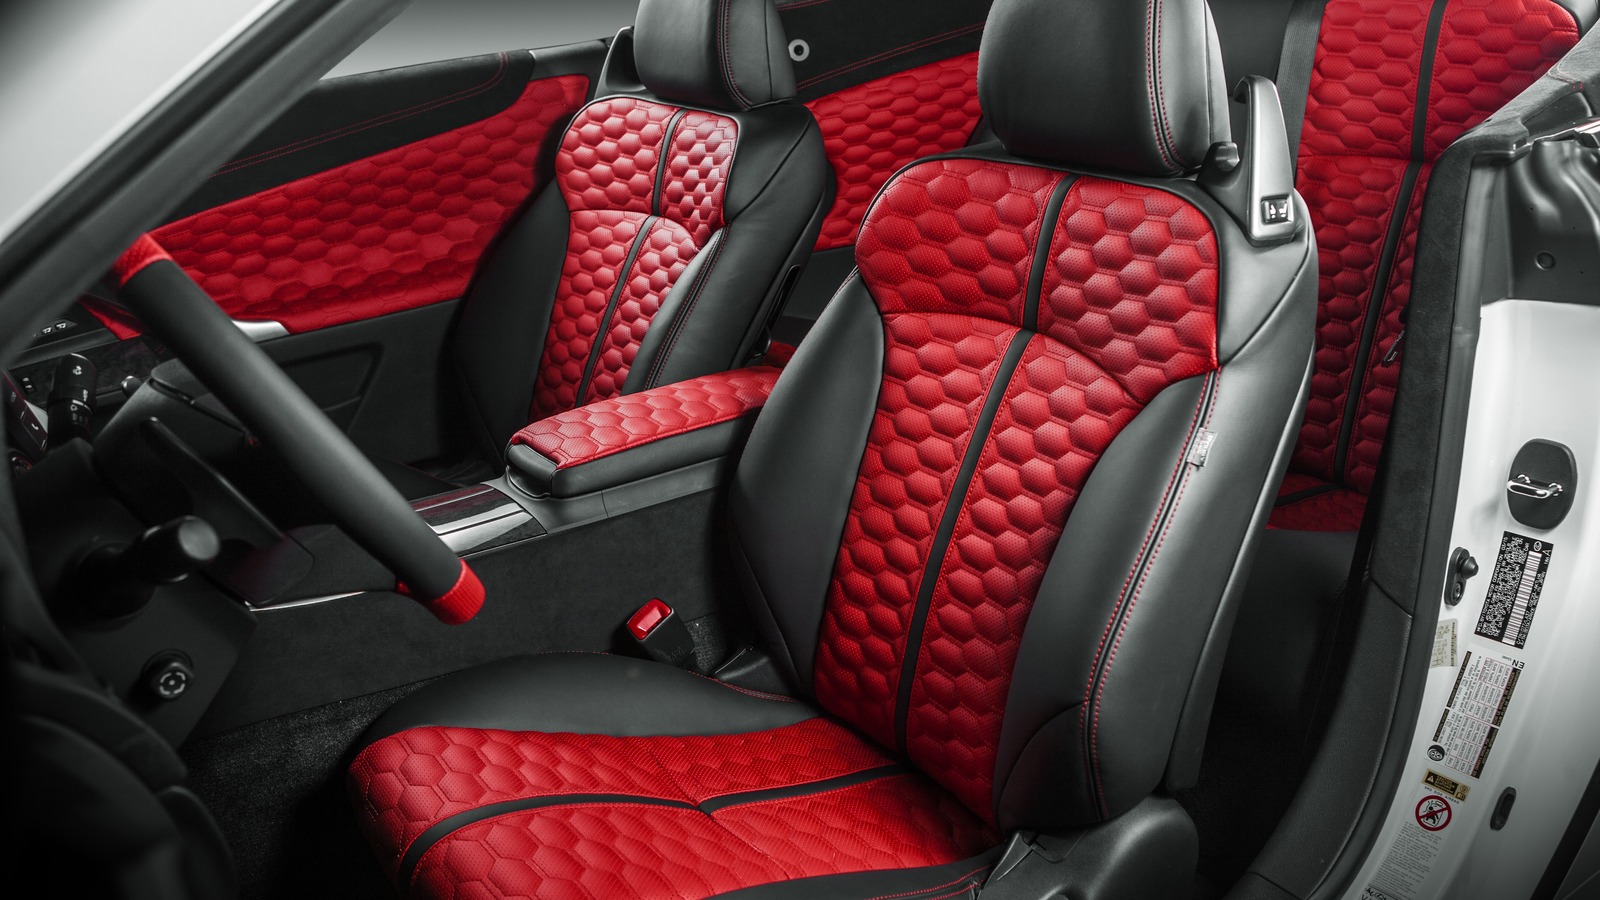 https://www.slashgear.com/img/gallery/what-is-alcantara-fabric-in-a-car-and-how-its-different-from-suede/l-intro-1694784279.jpg